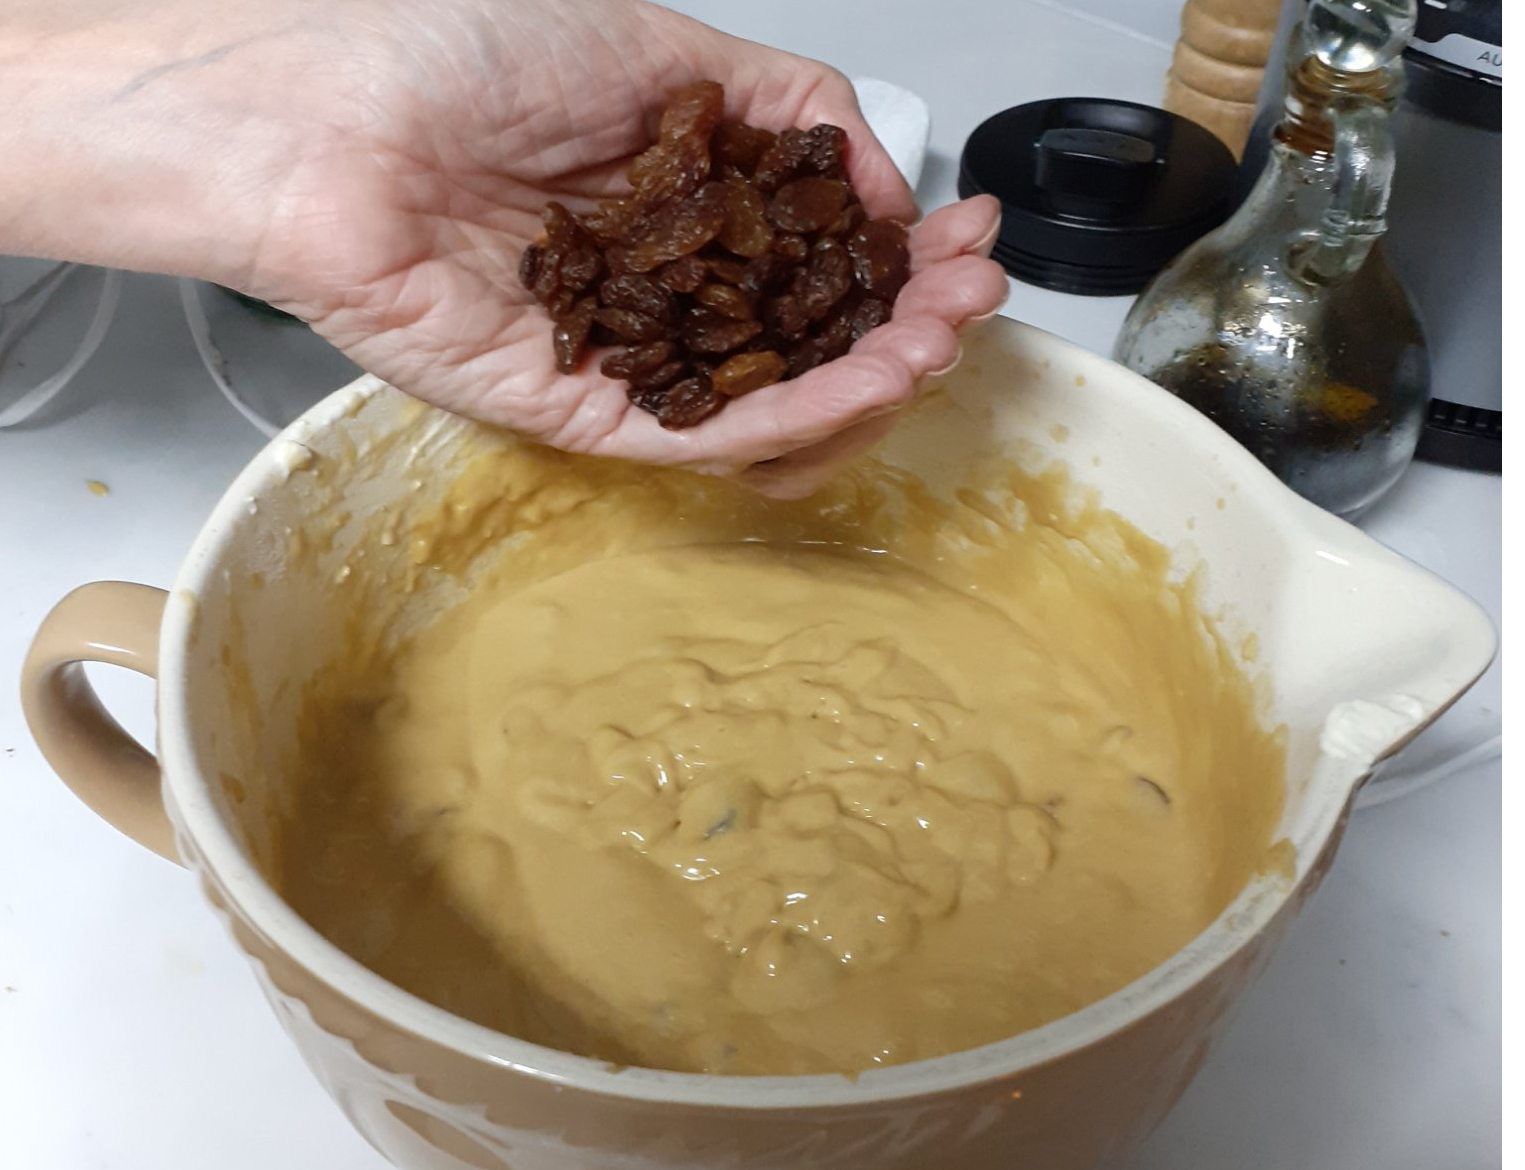 hand of white person holding sultanas, about to put into bowl of yellowish-gold cake mixture - on white worktop